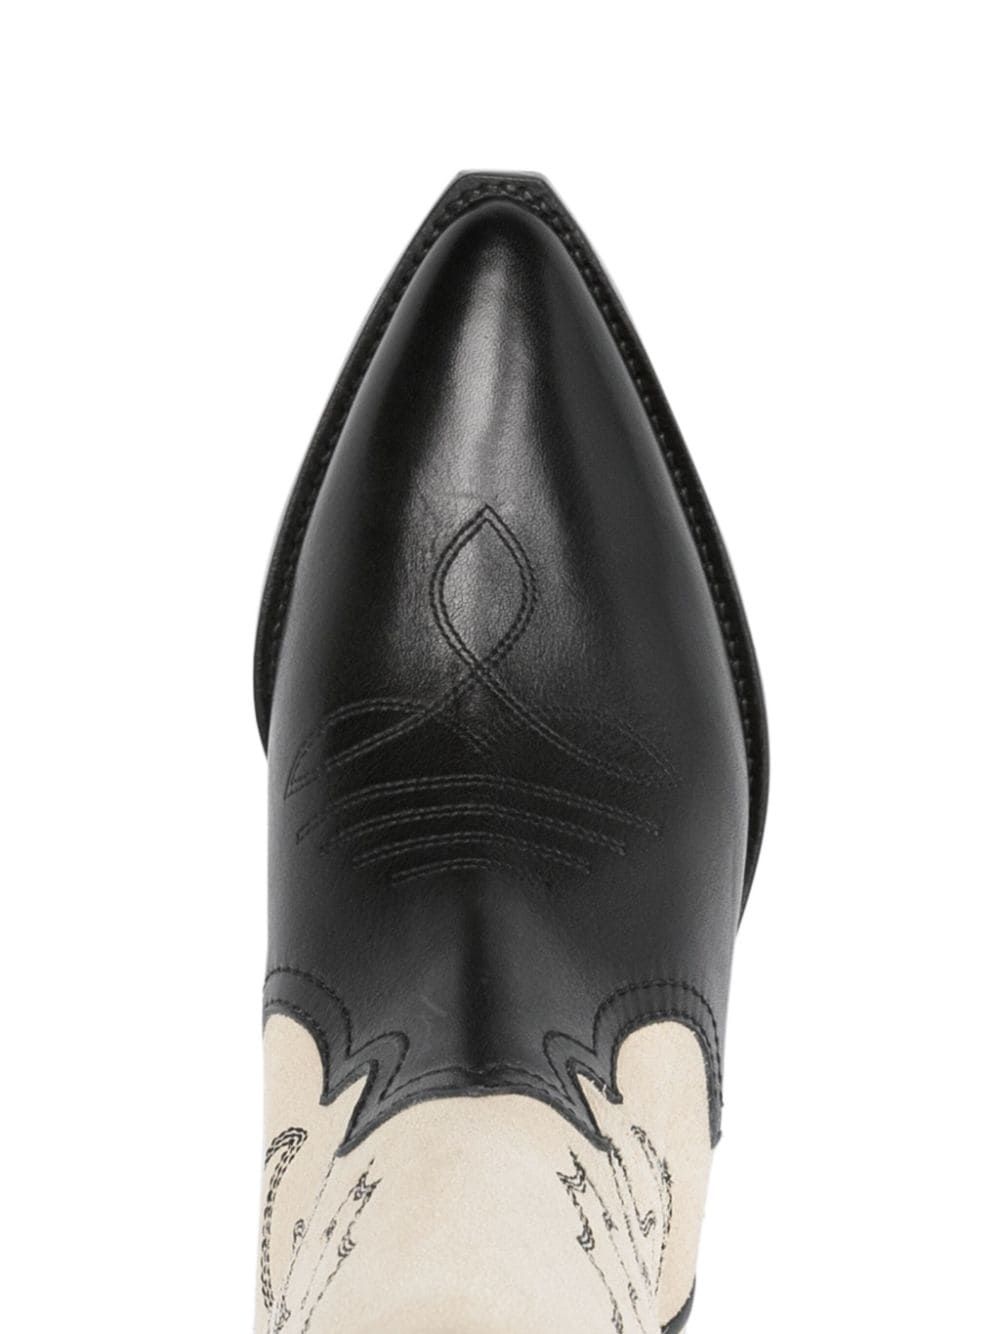 Black and White Embroidered Leather Boots for Women